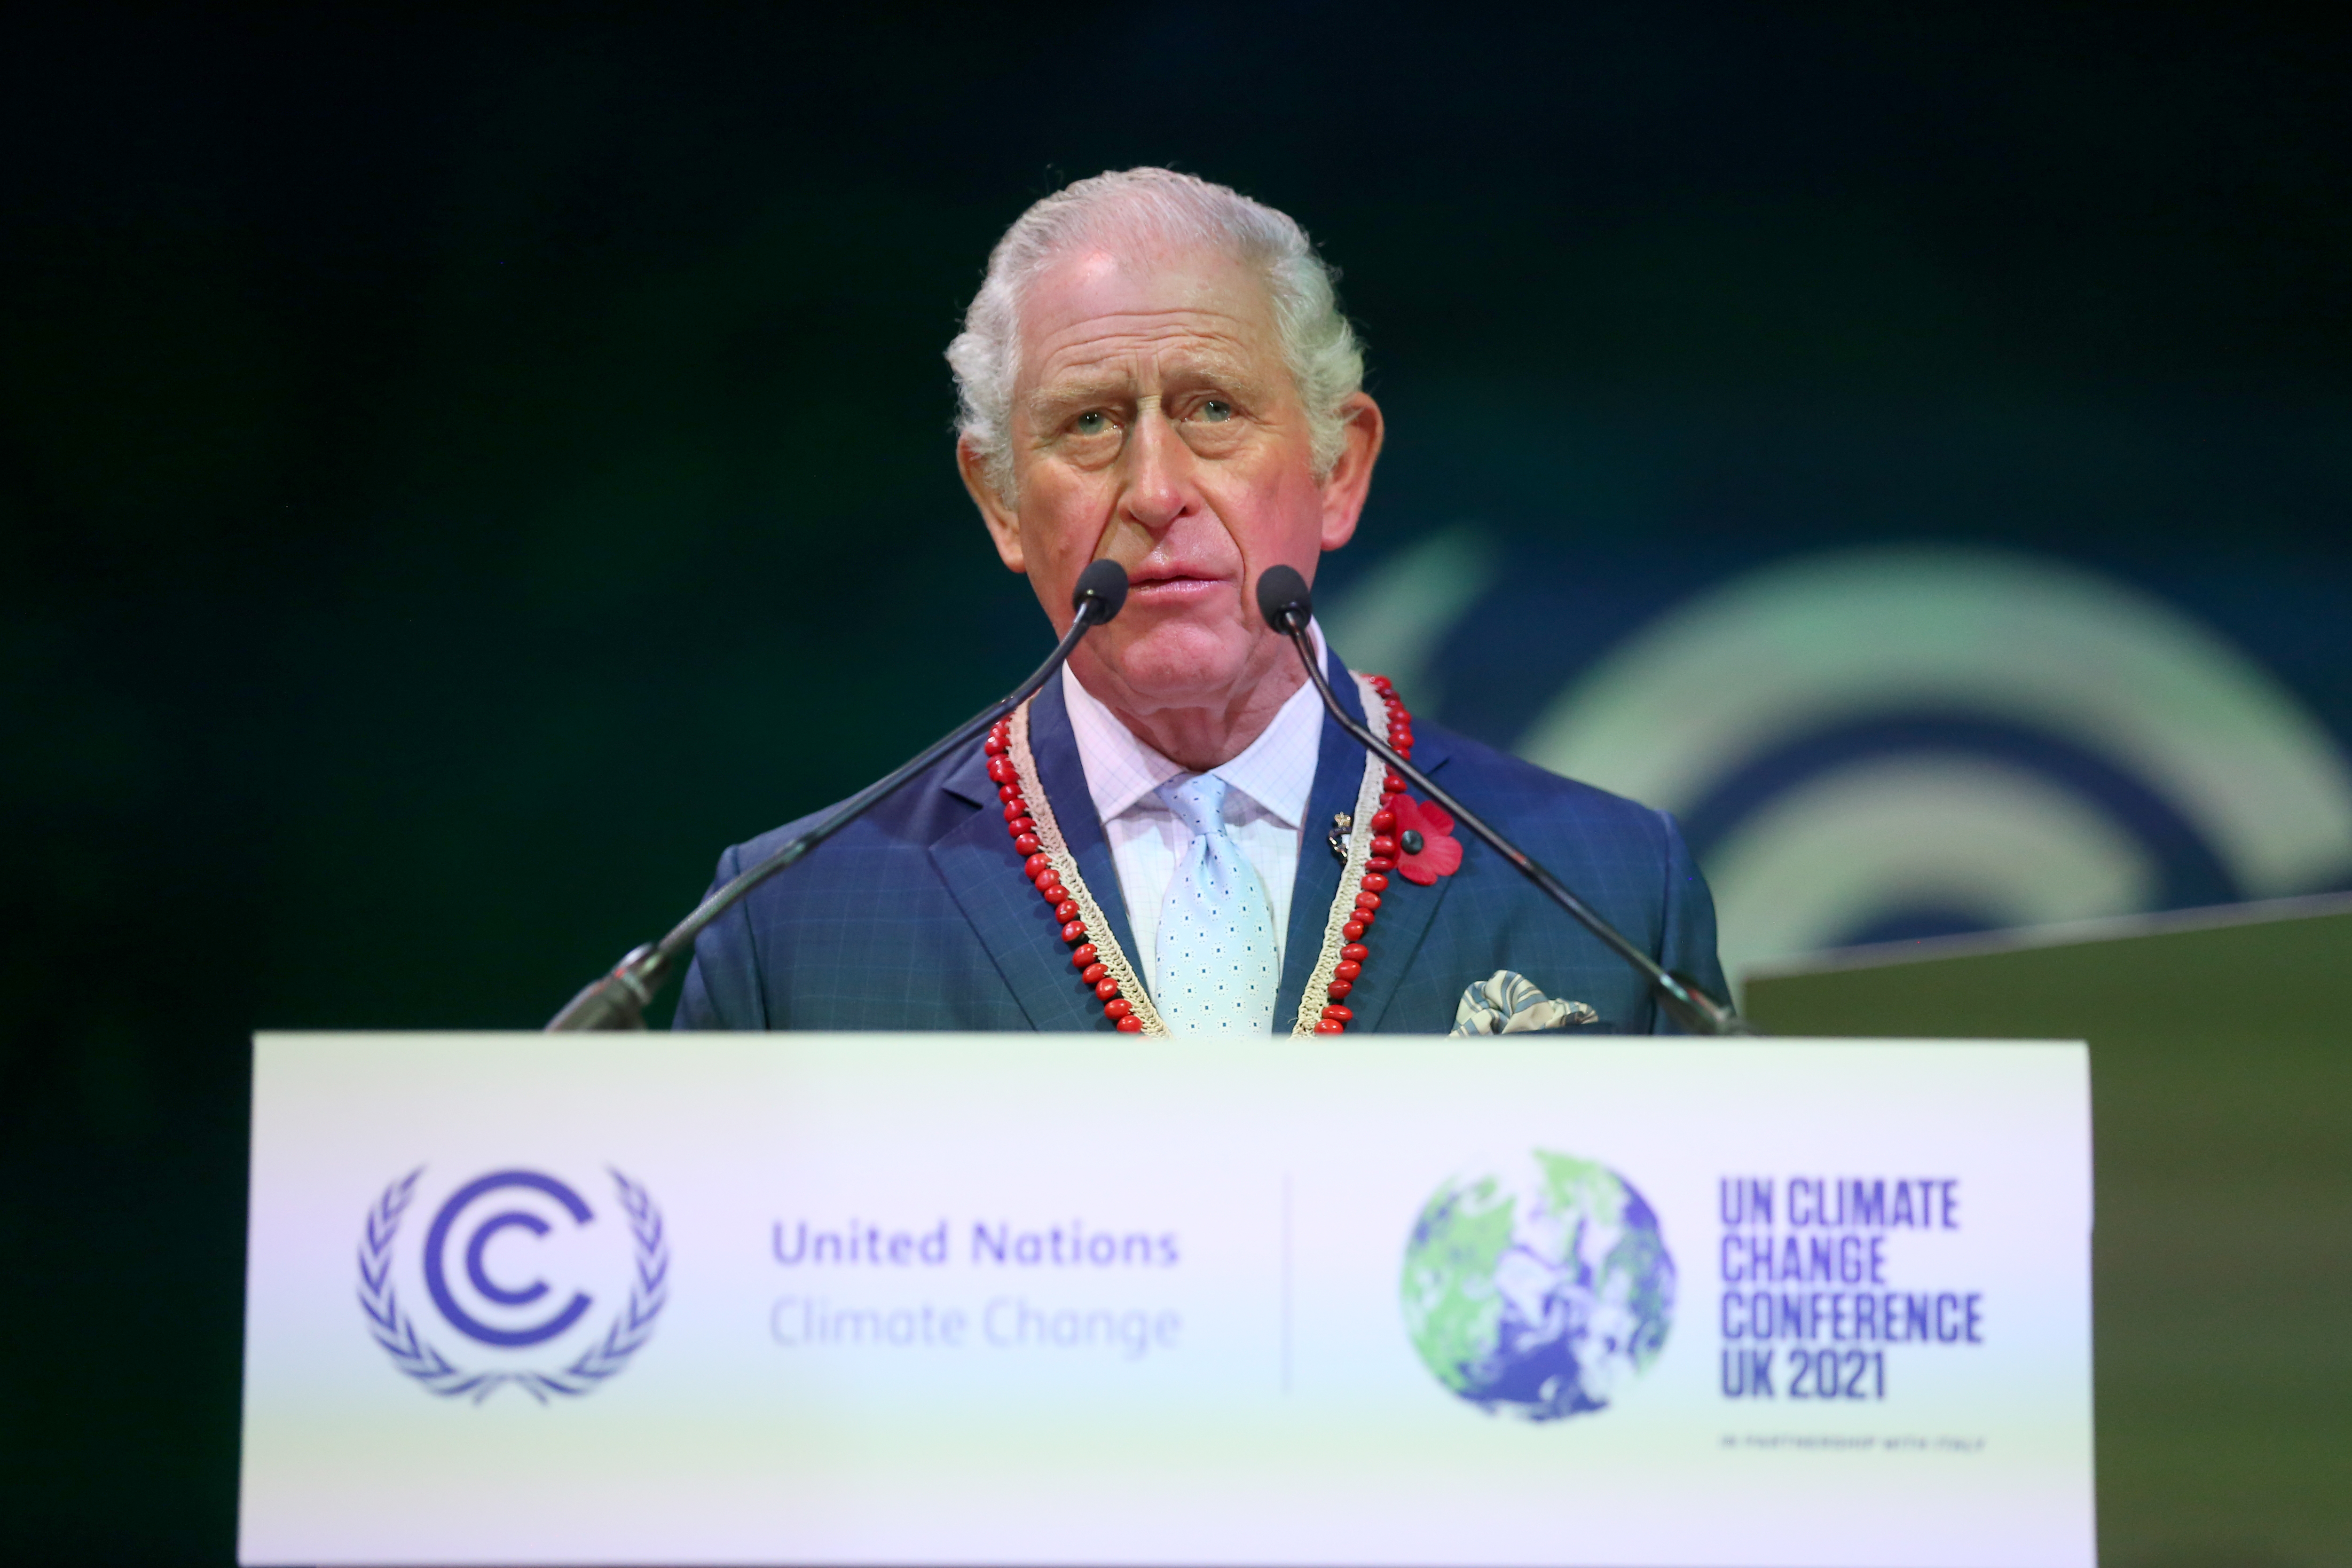 Britain's King Charles II, then Prince Charles, Prince of Wales, speaks during the Action on Forests and Land Use session at the UN Climate Change Conference (COP26) in Glasgow, Britain, 02 November 2021. EPA-EFE/ROBERT PERRY